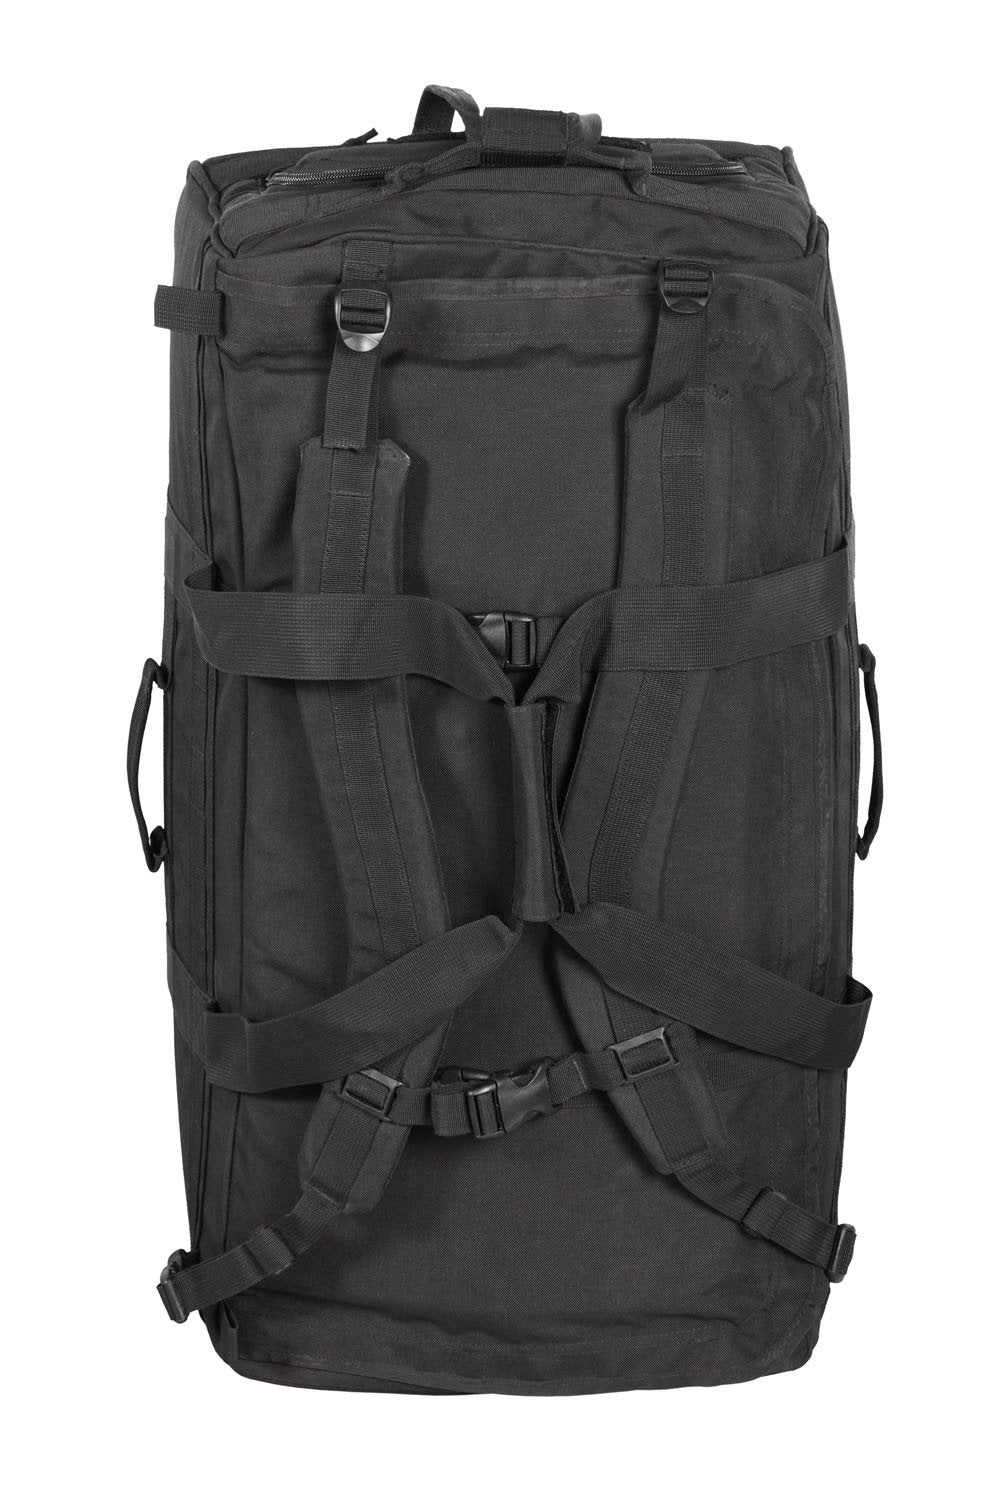 383 FIELD KITBAG front view